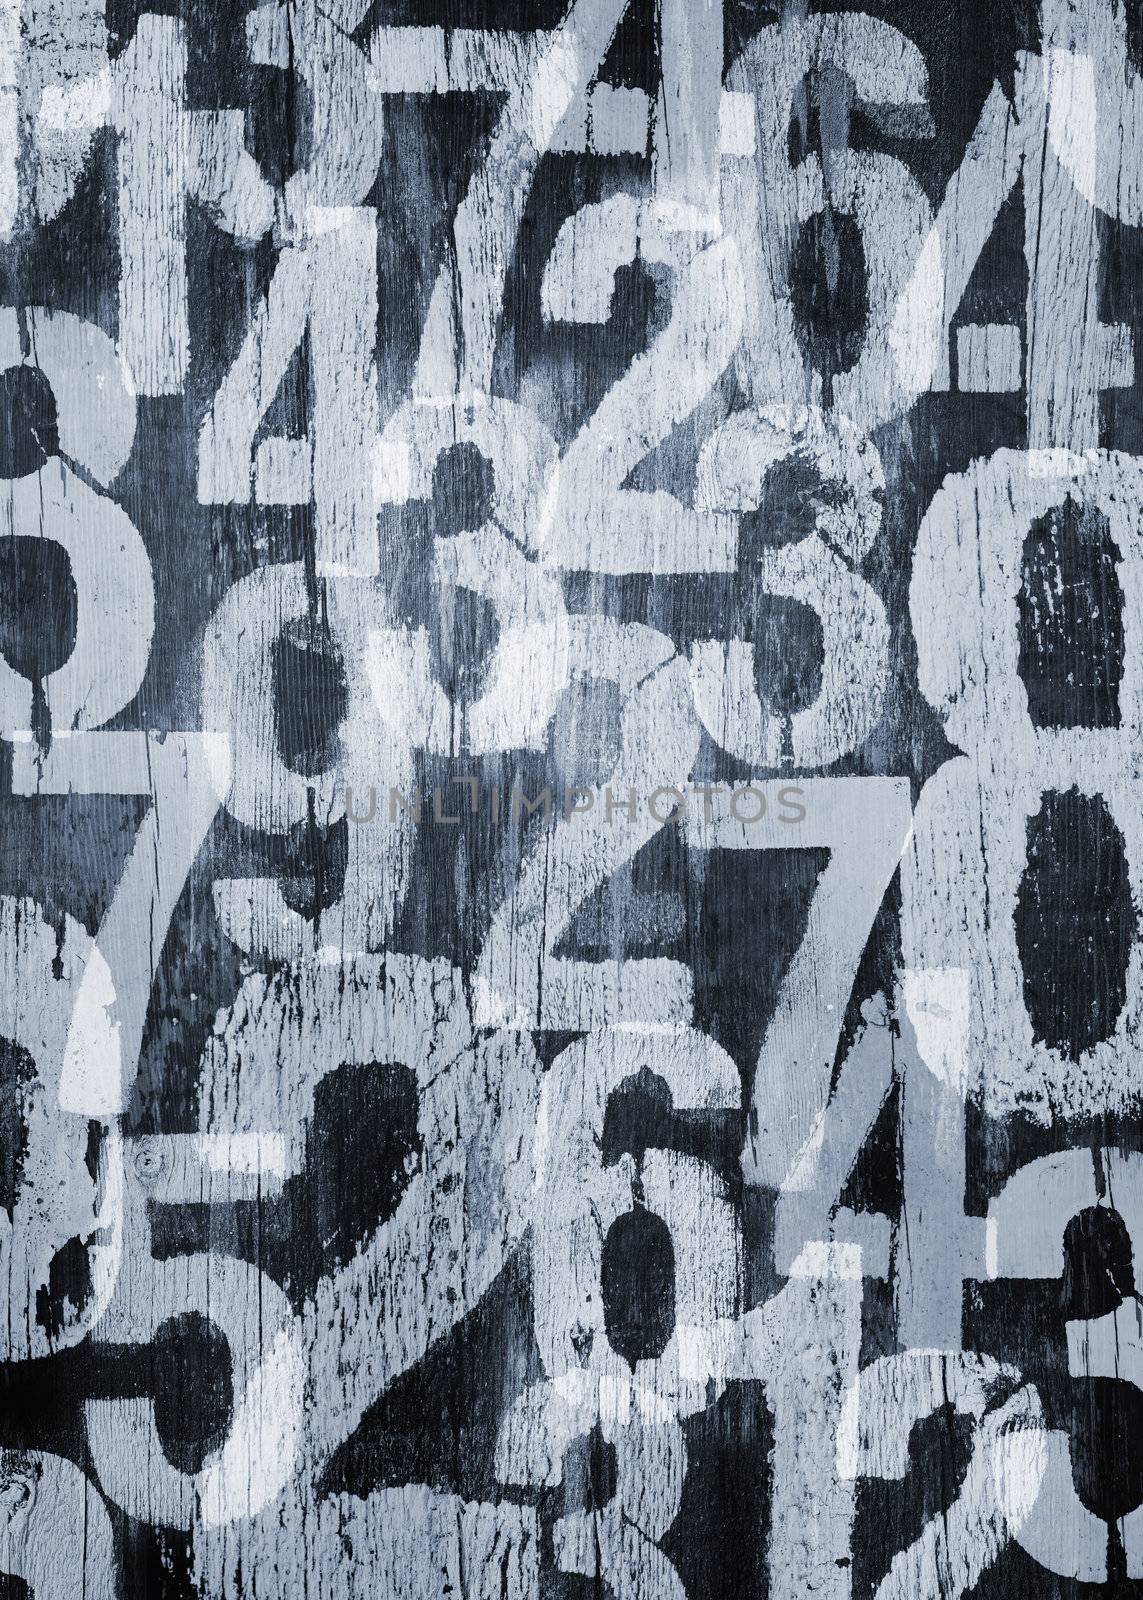 Grunge numbers by Stocksnapper